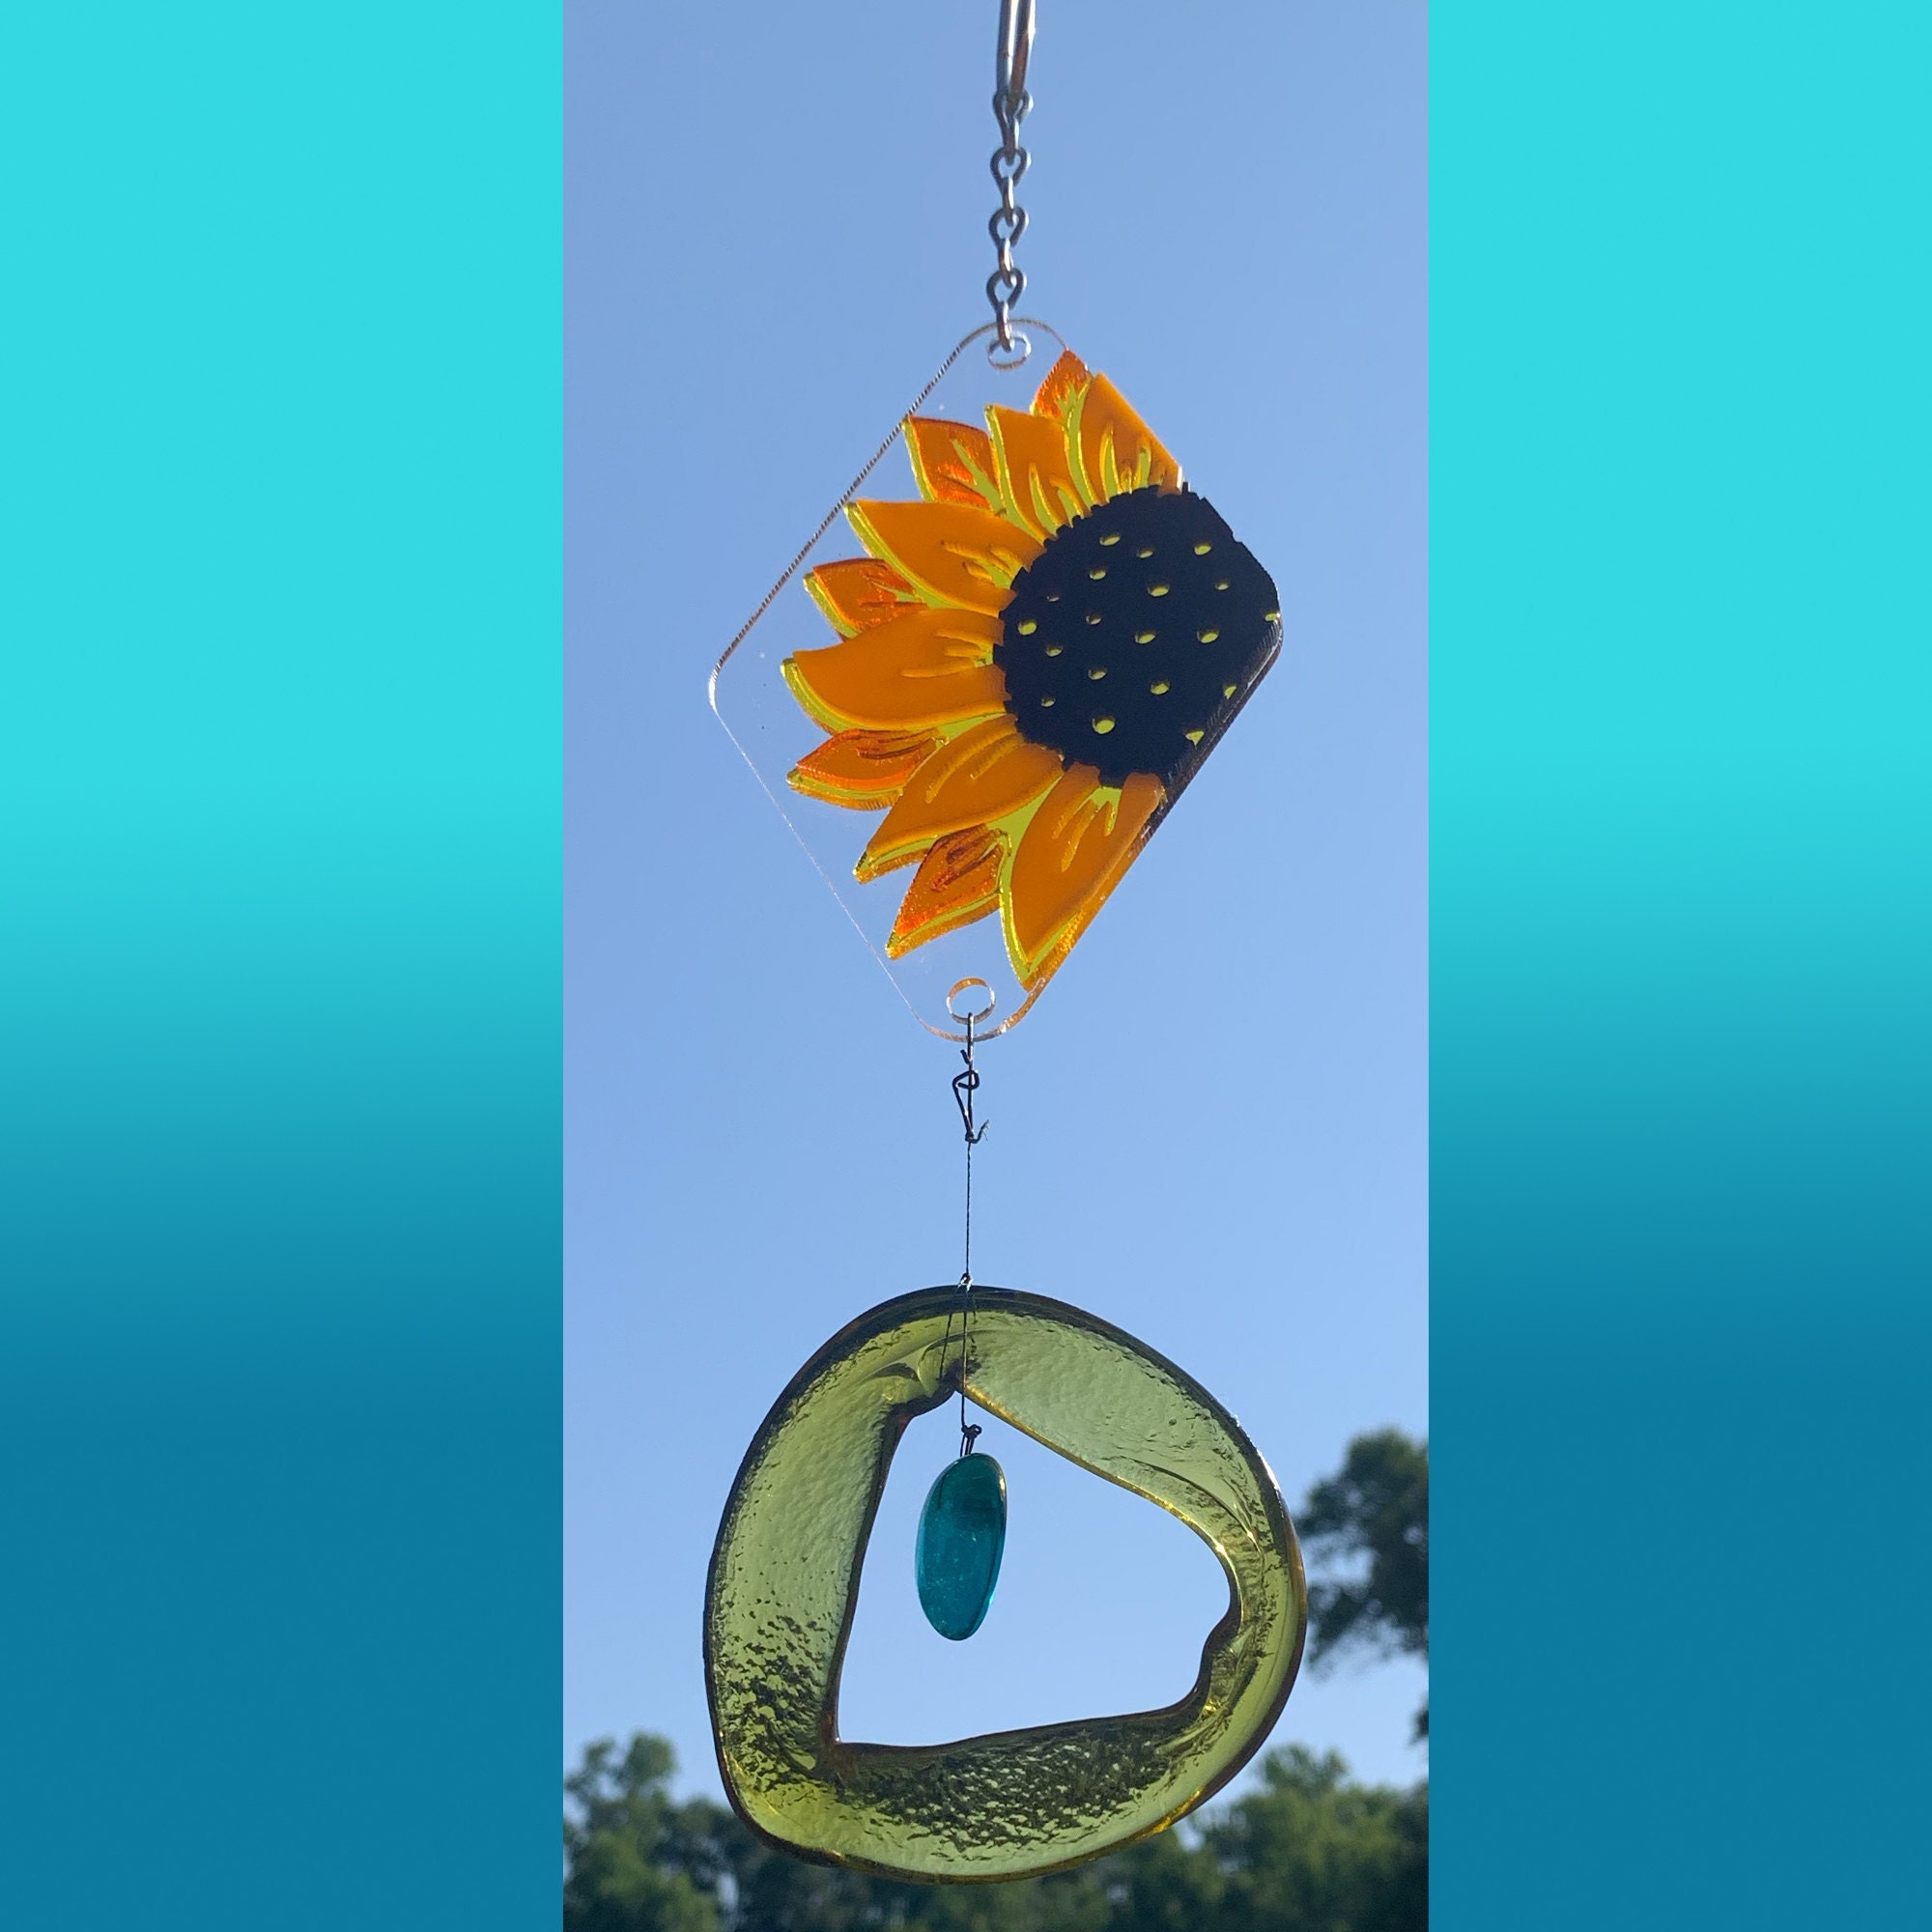 Jewelry Making Article - Make Your Own Wind Chimes with Jewelry Supplies -  Fire Mountain Gems and Beads